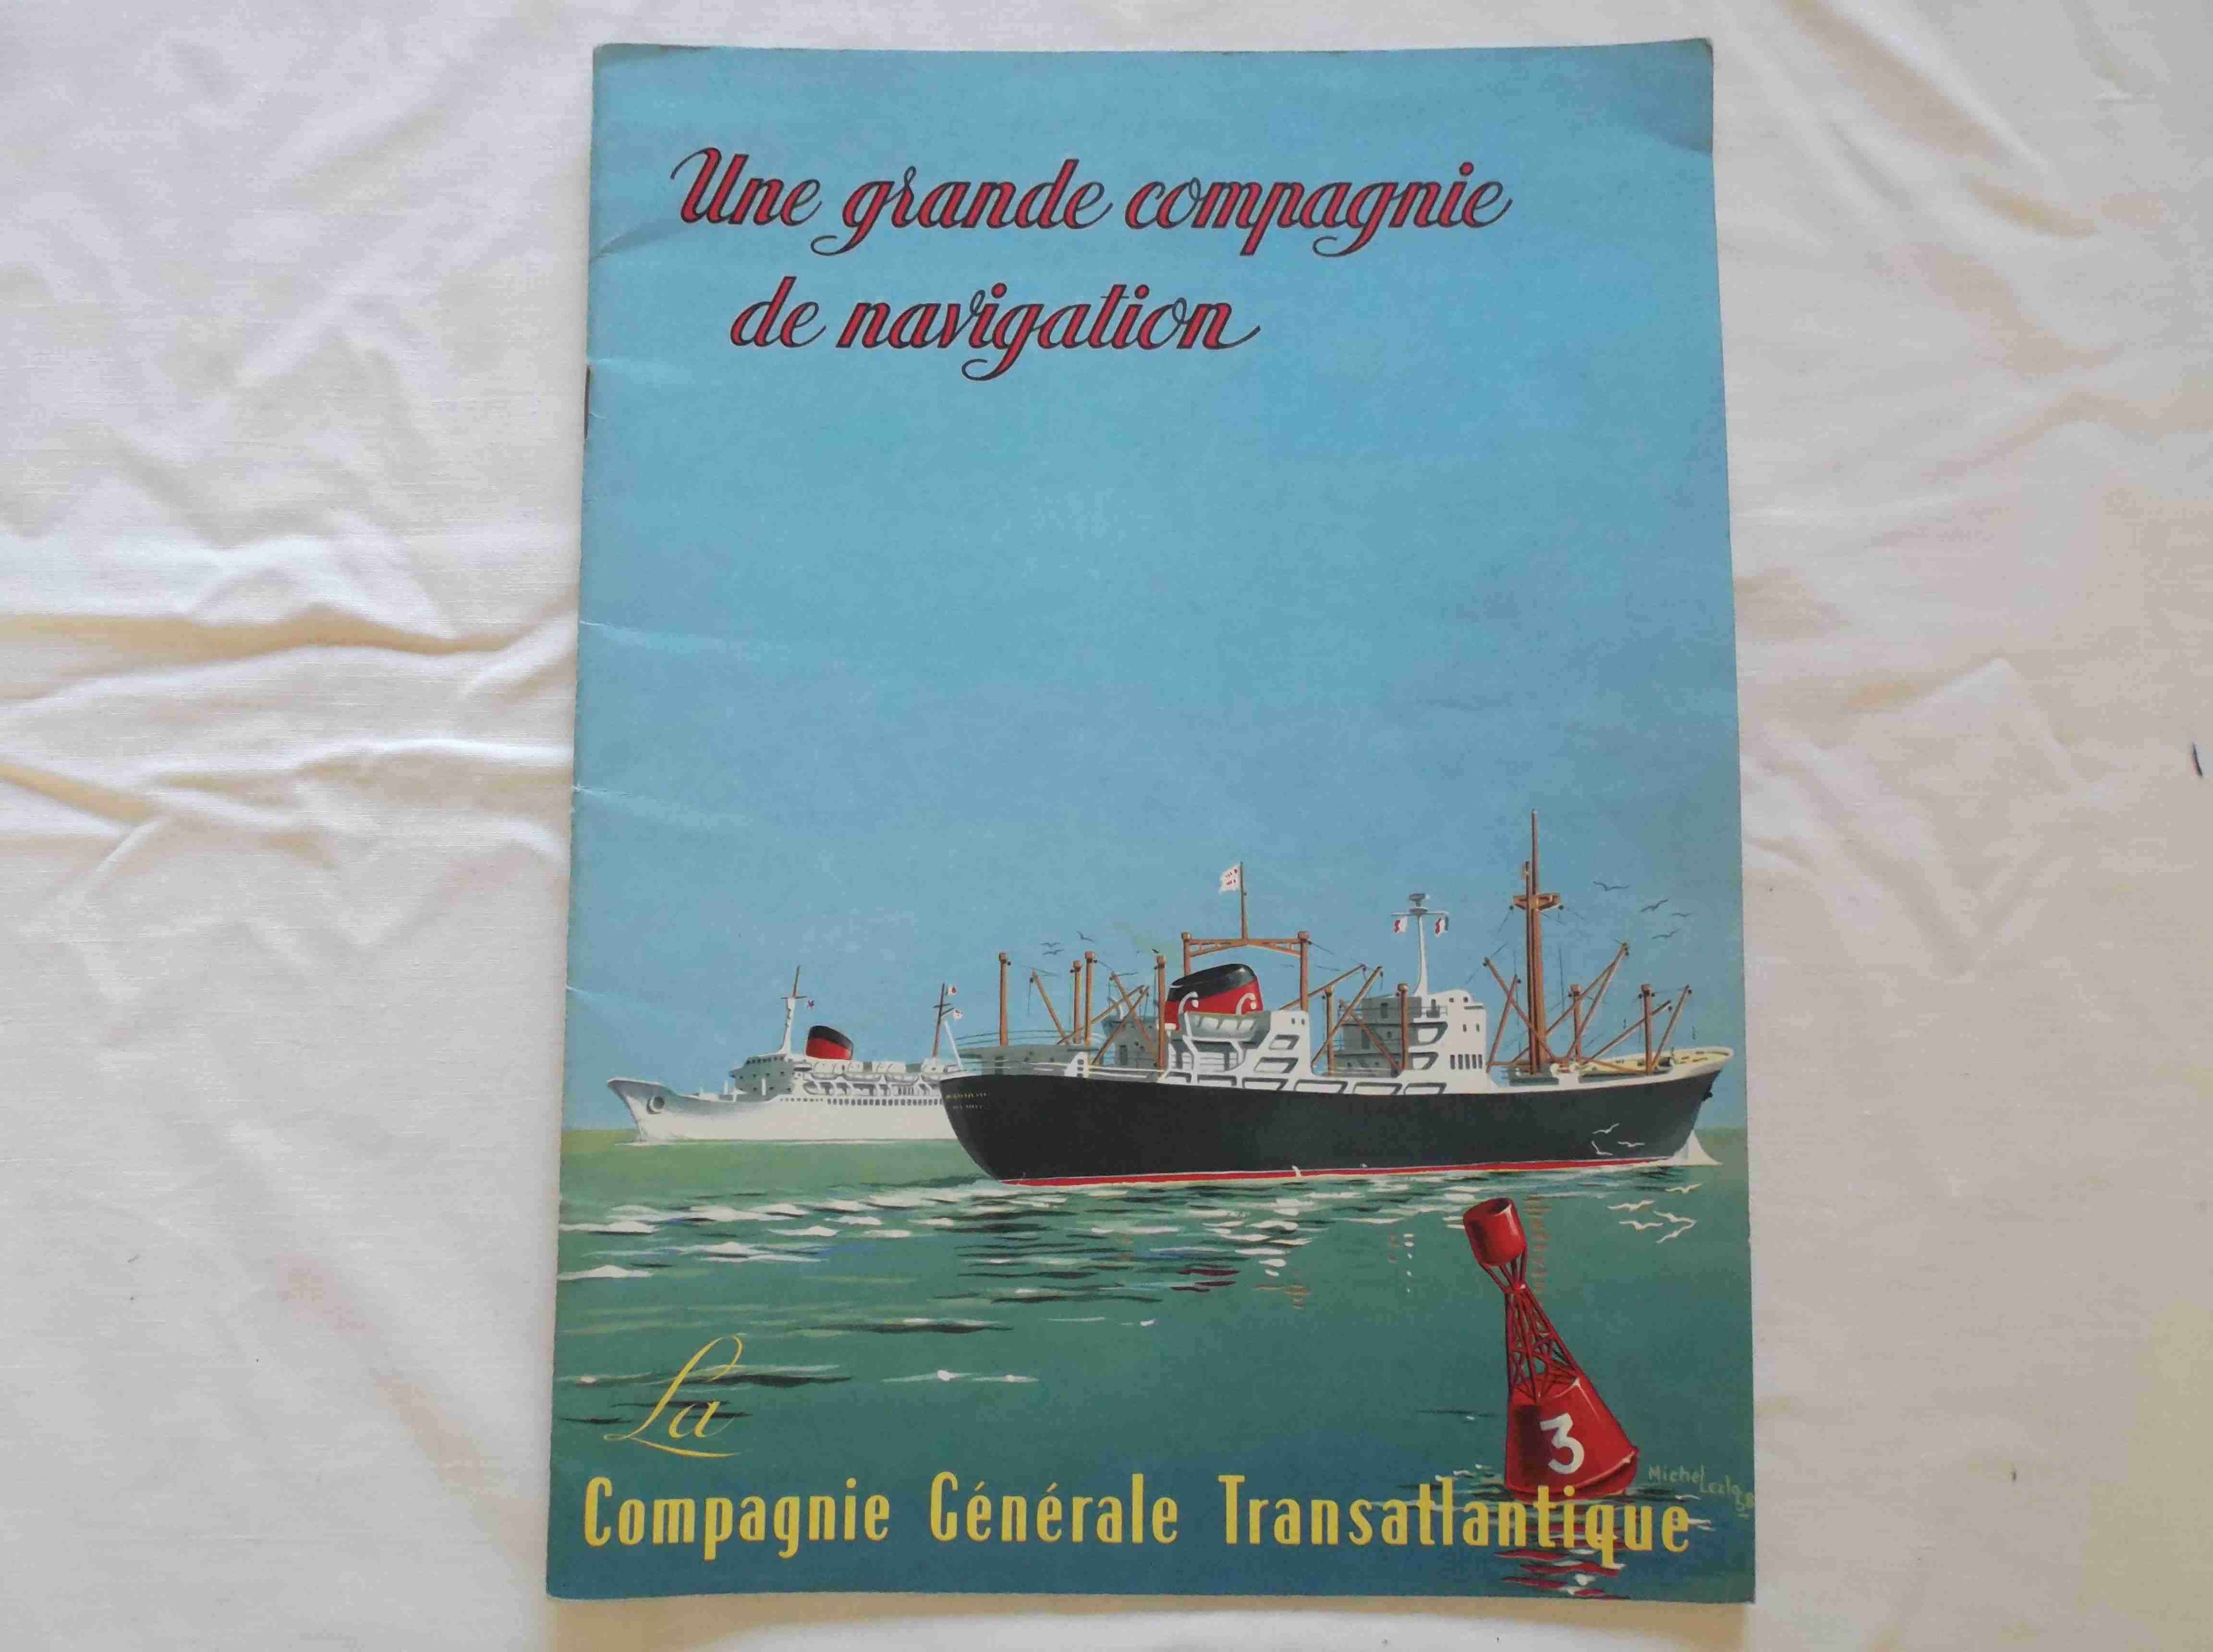 EARLY FRENCH LINE SHIPPING COMPANY MAGAZINE FROM THE 1960's